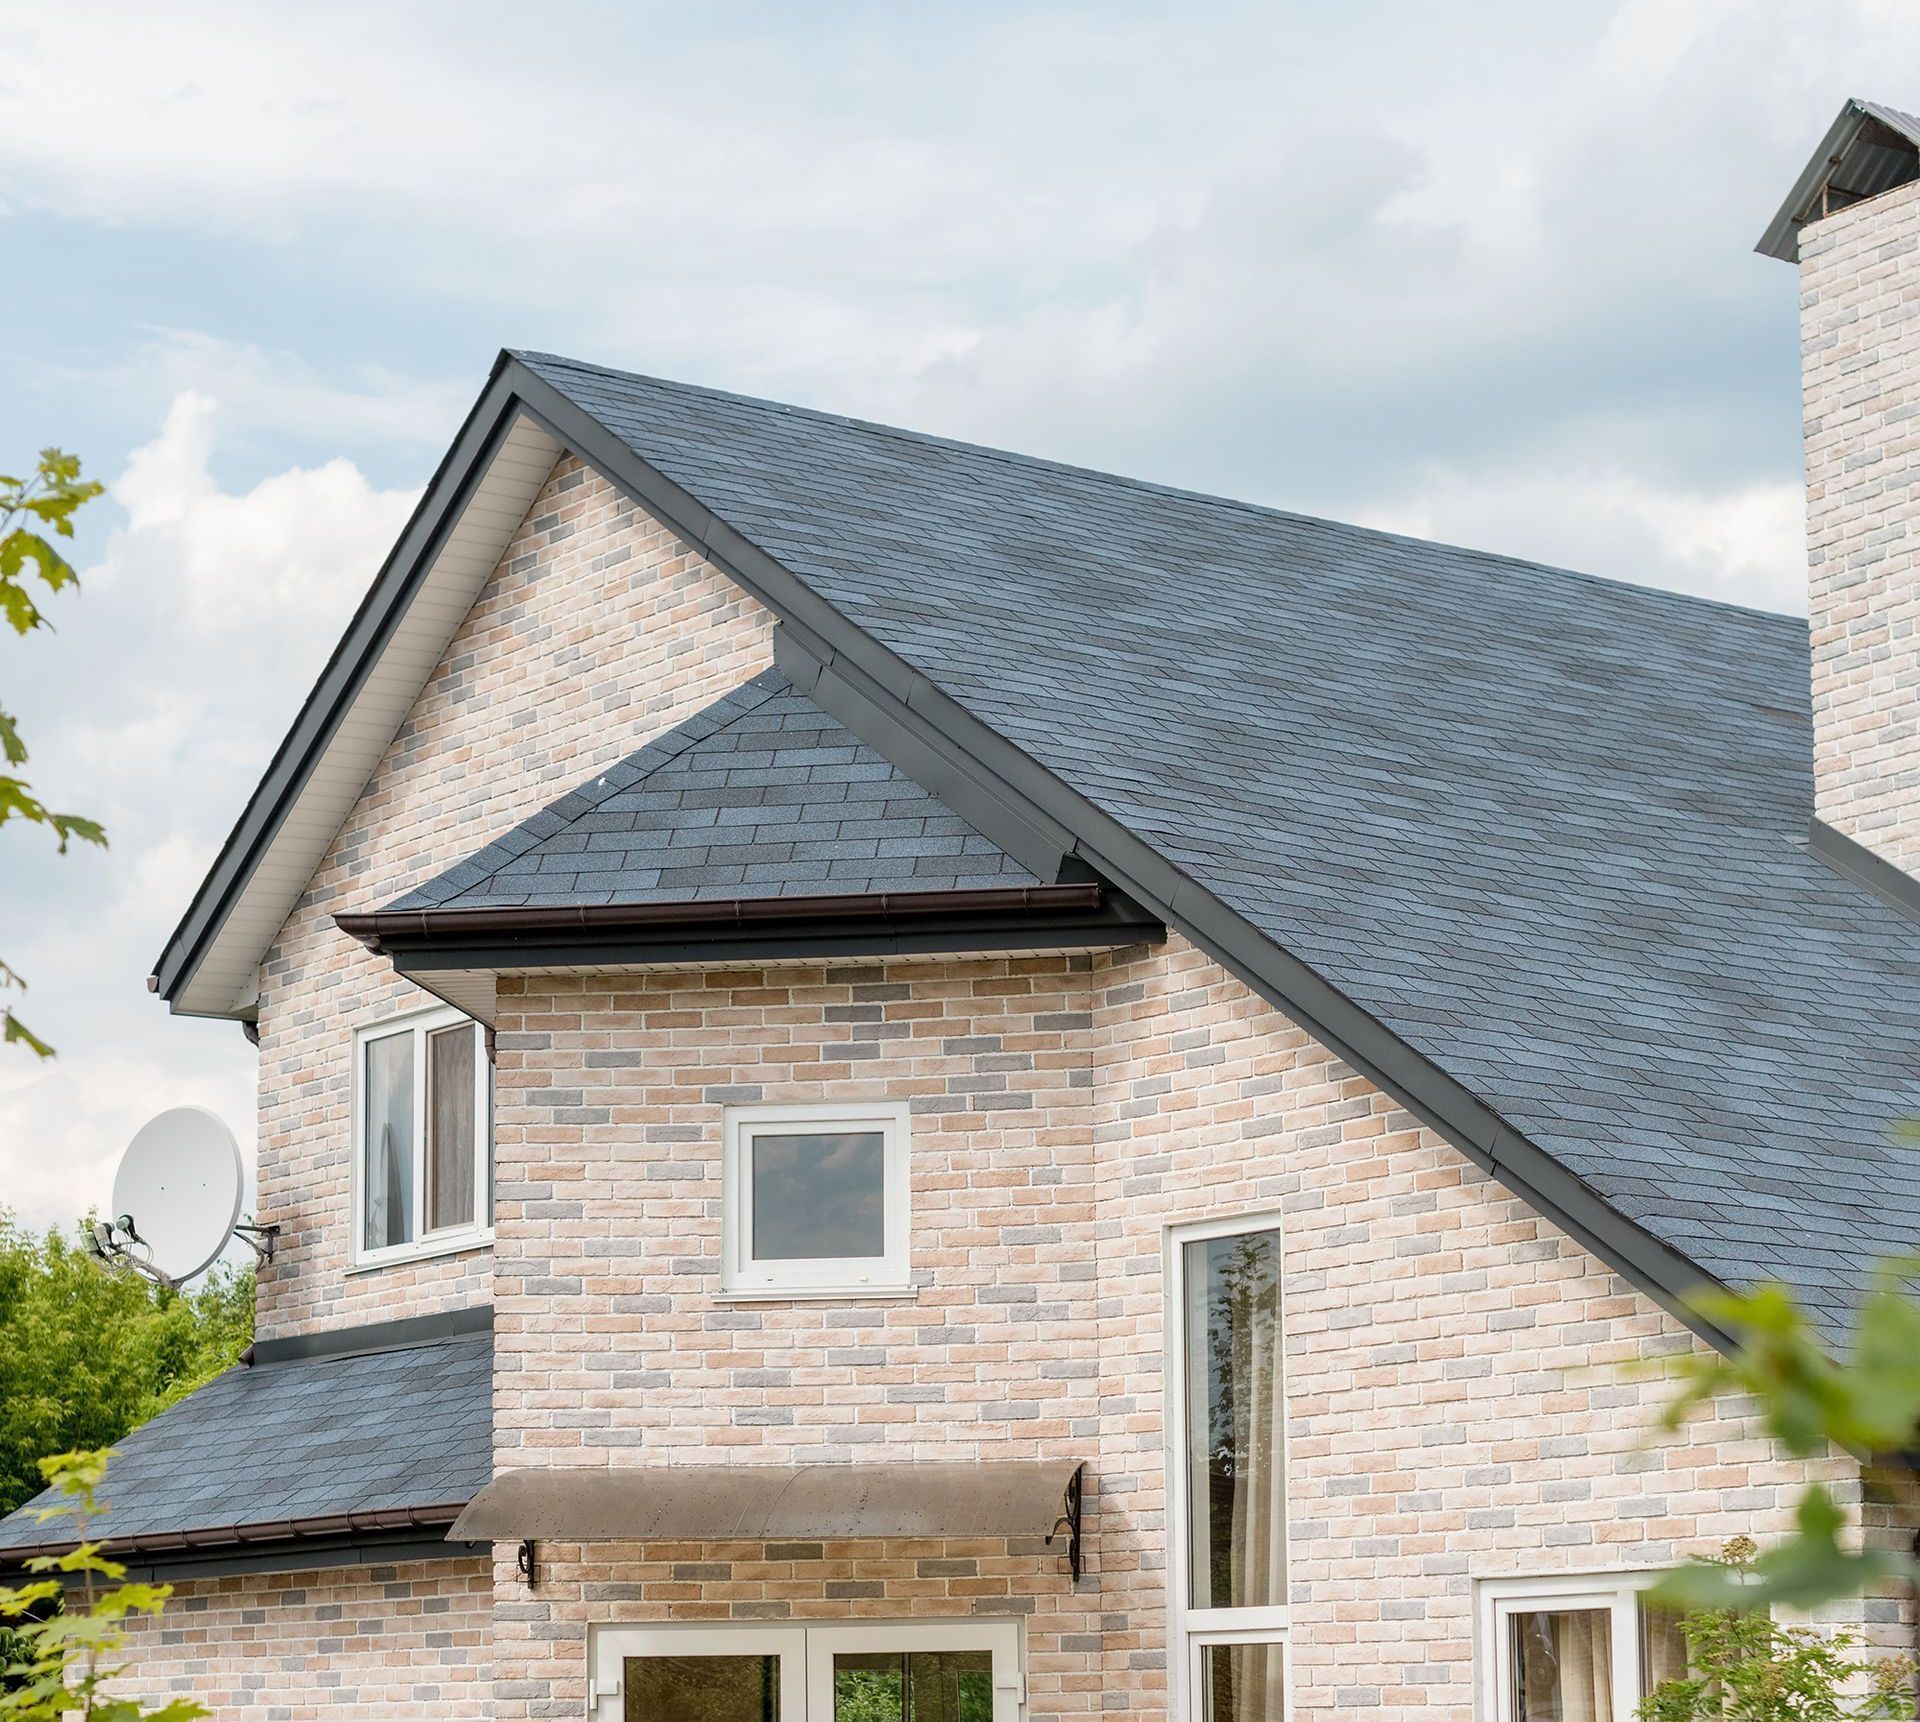 Elevate Your Home's Protection with Expert Roof Repairs from Chavez Enterprises in Fulton, MO.